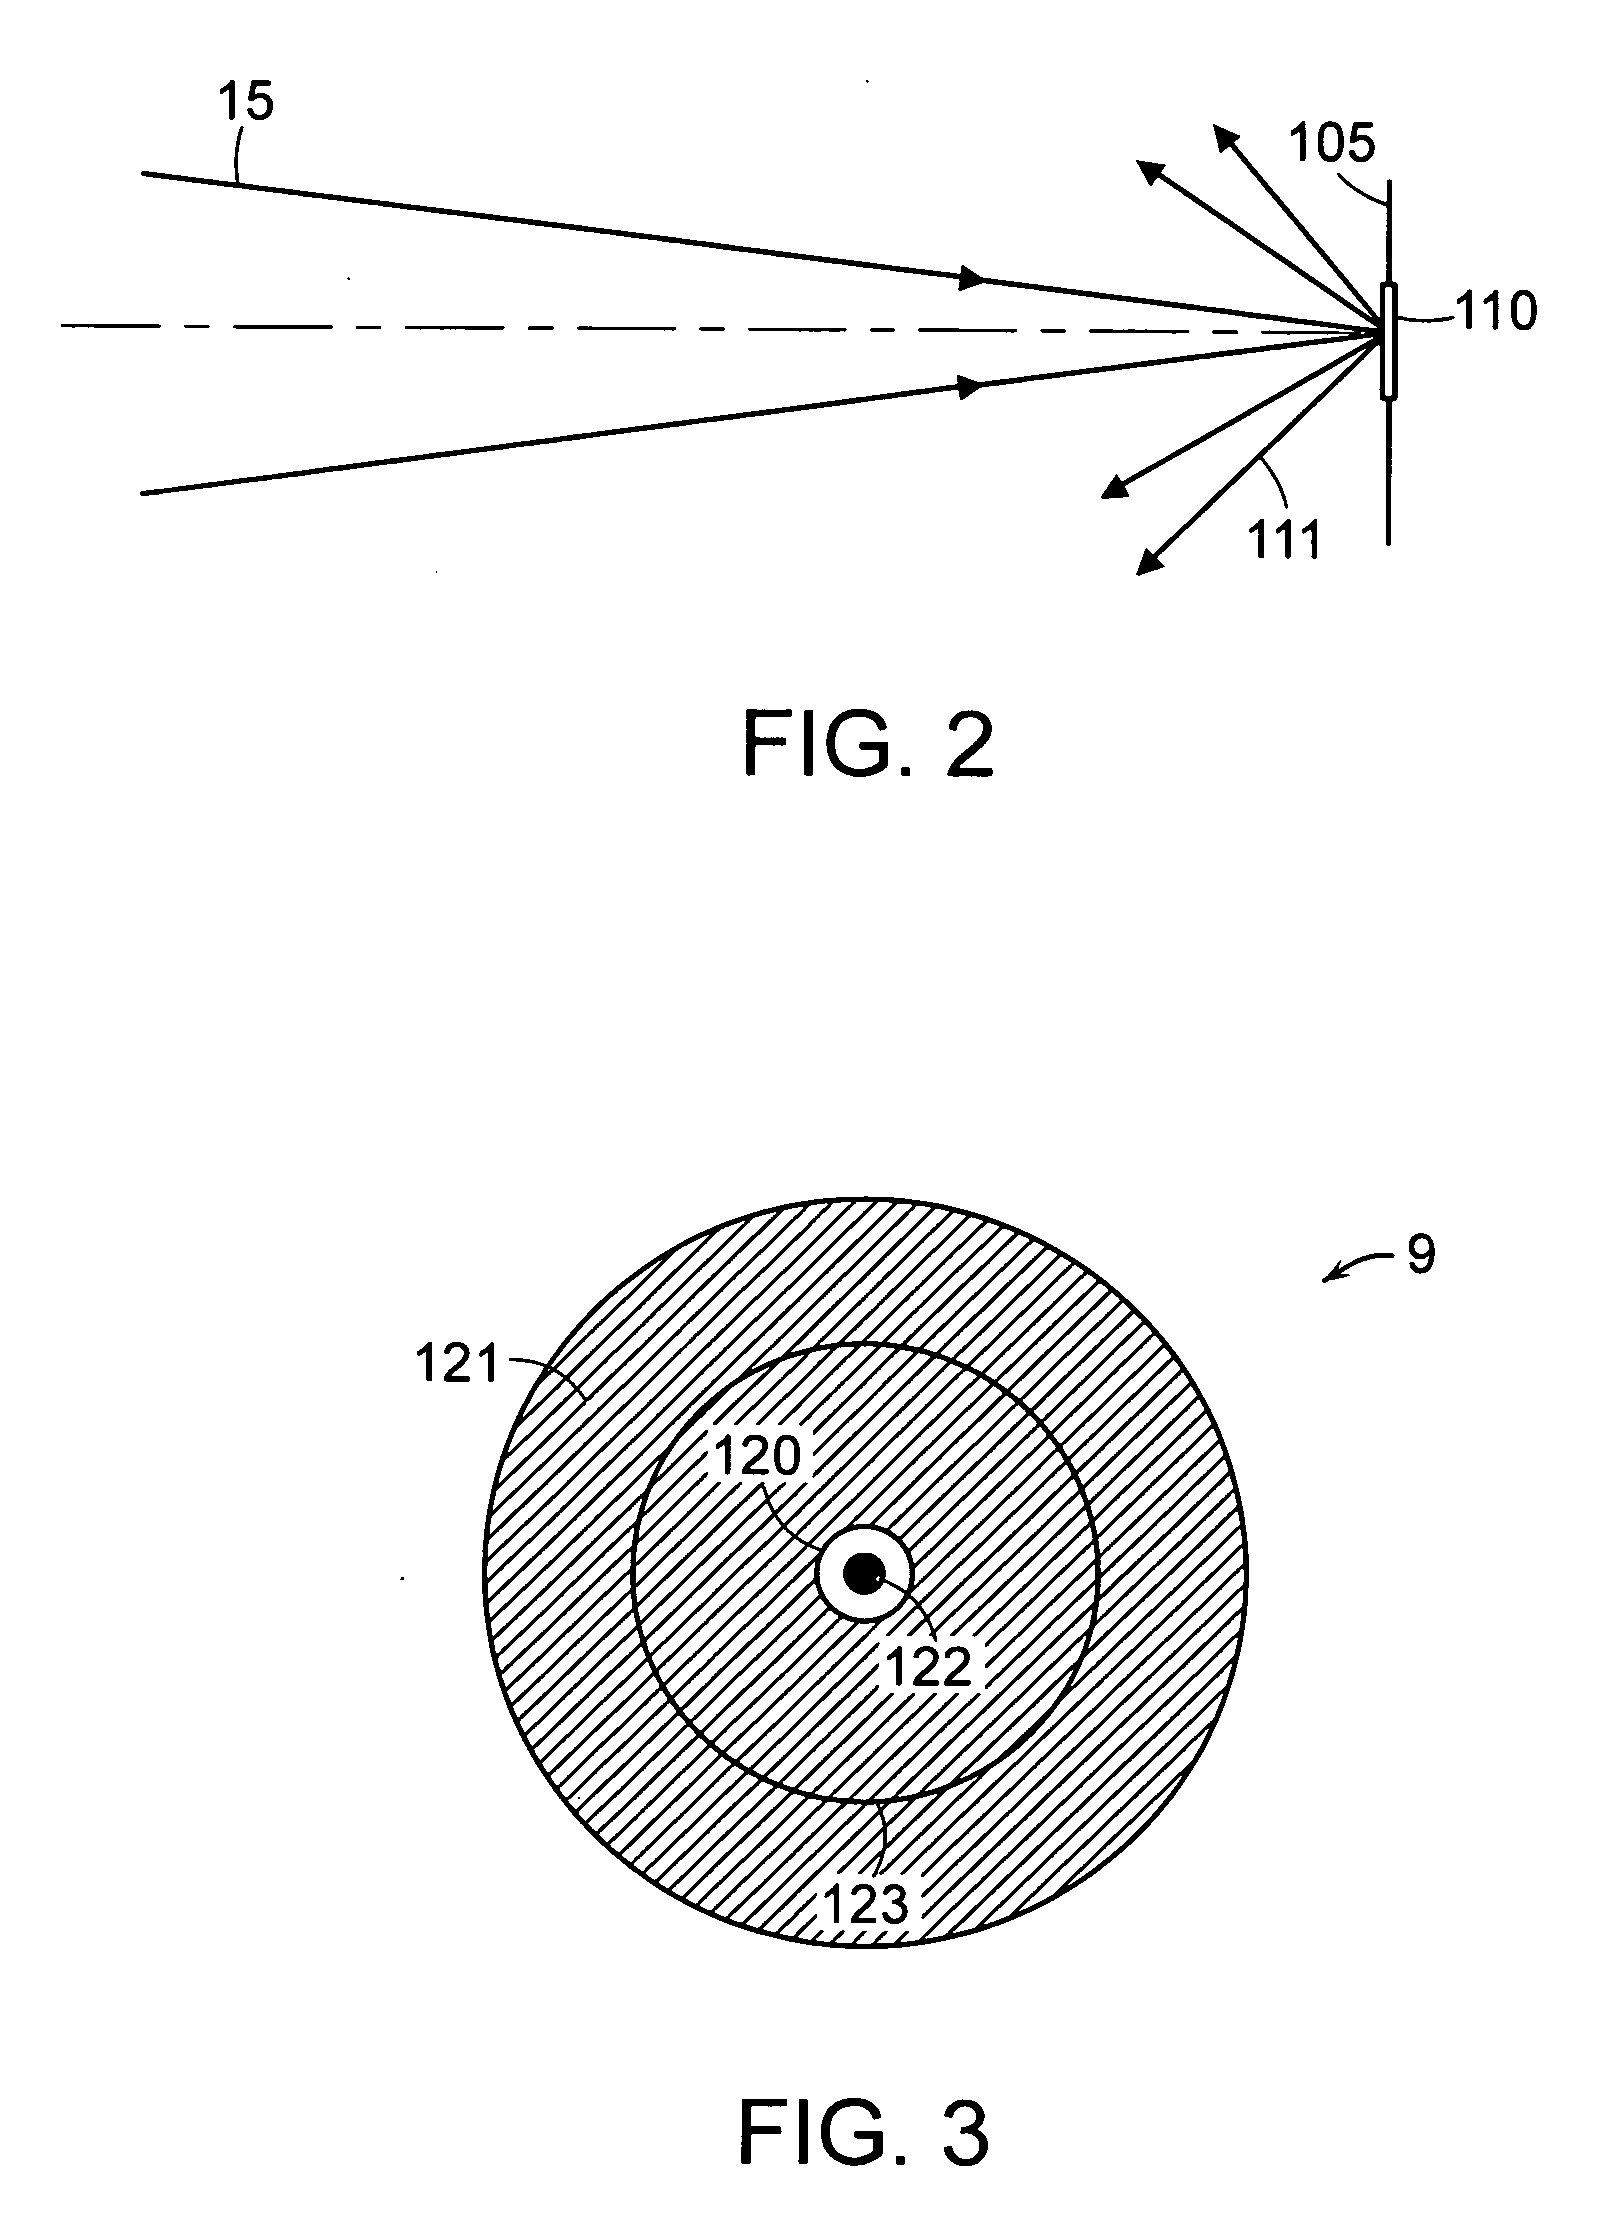 Laser radar projection with object feature detection and ranging